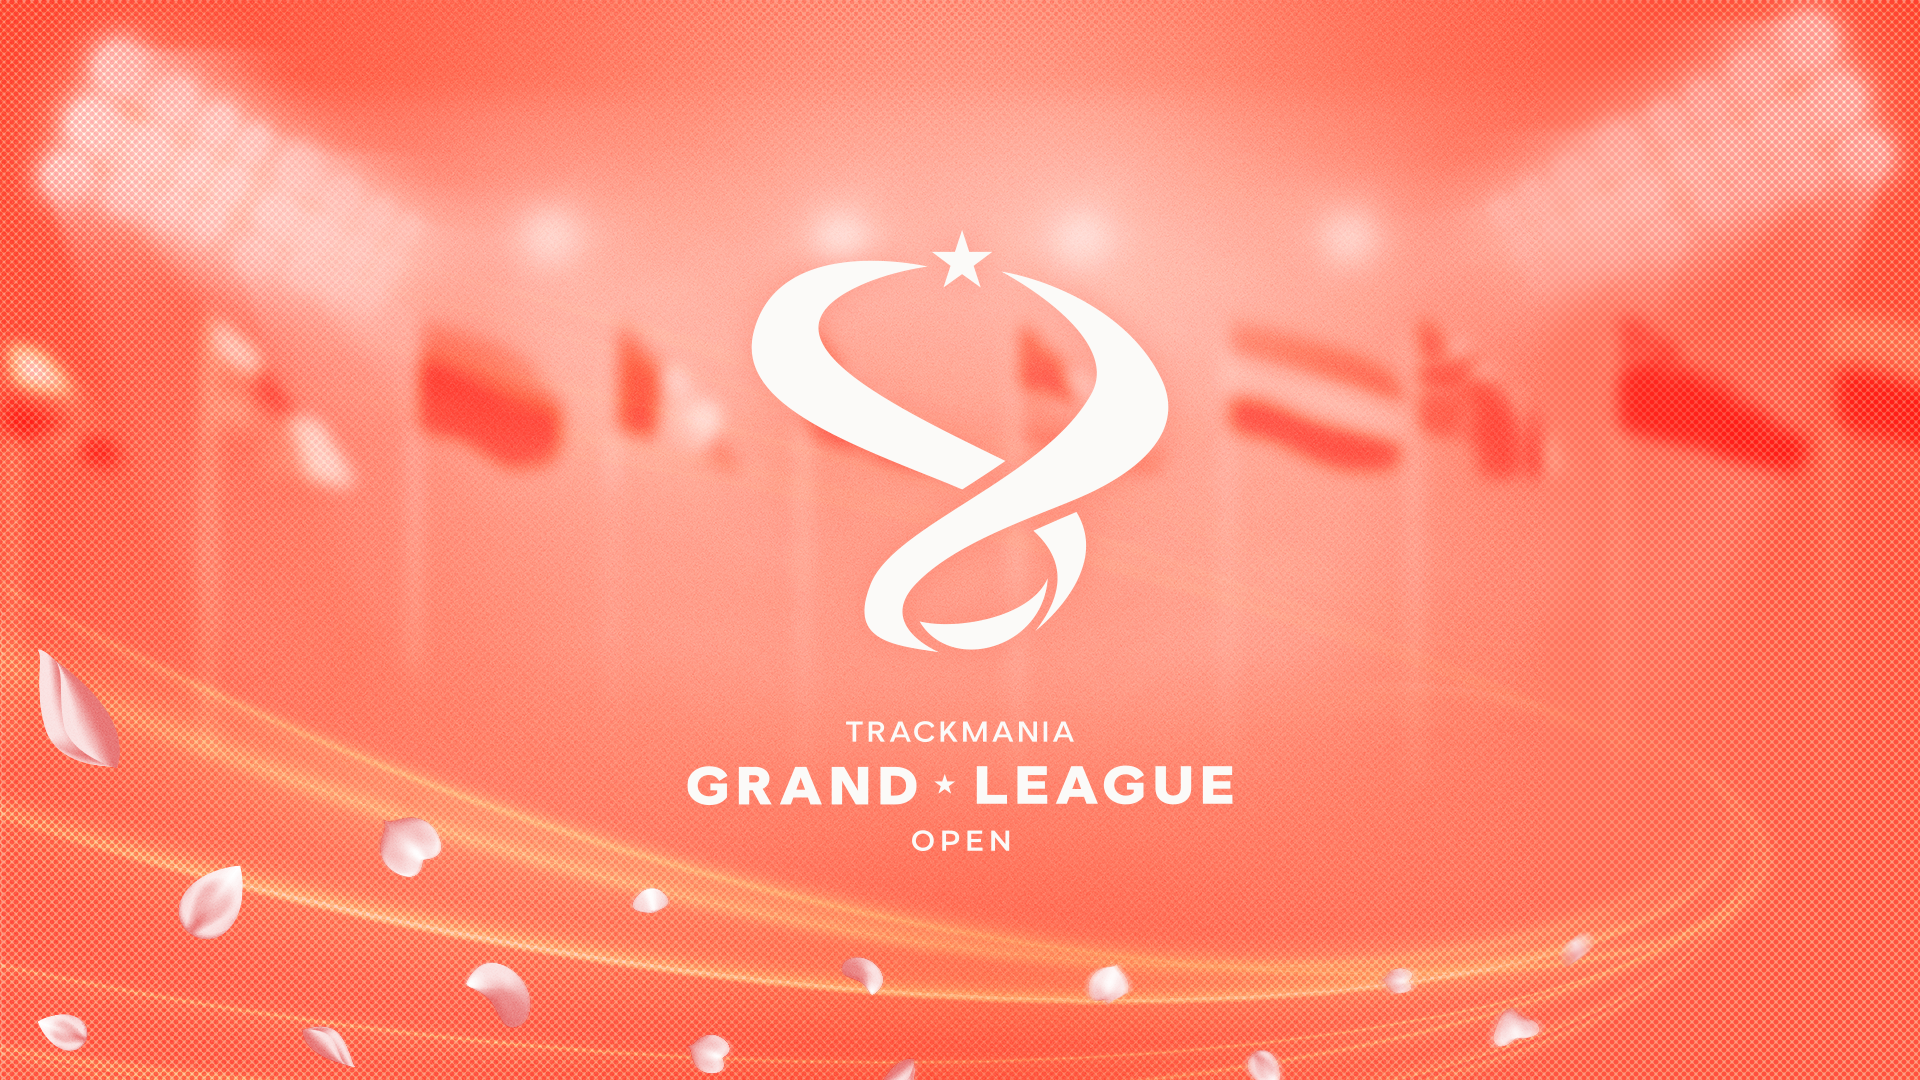 Join the Trackmania Grand League Open on March 12